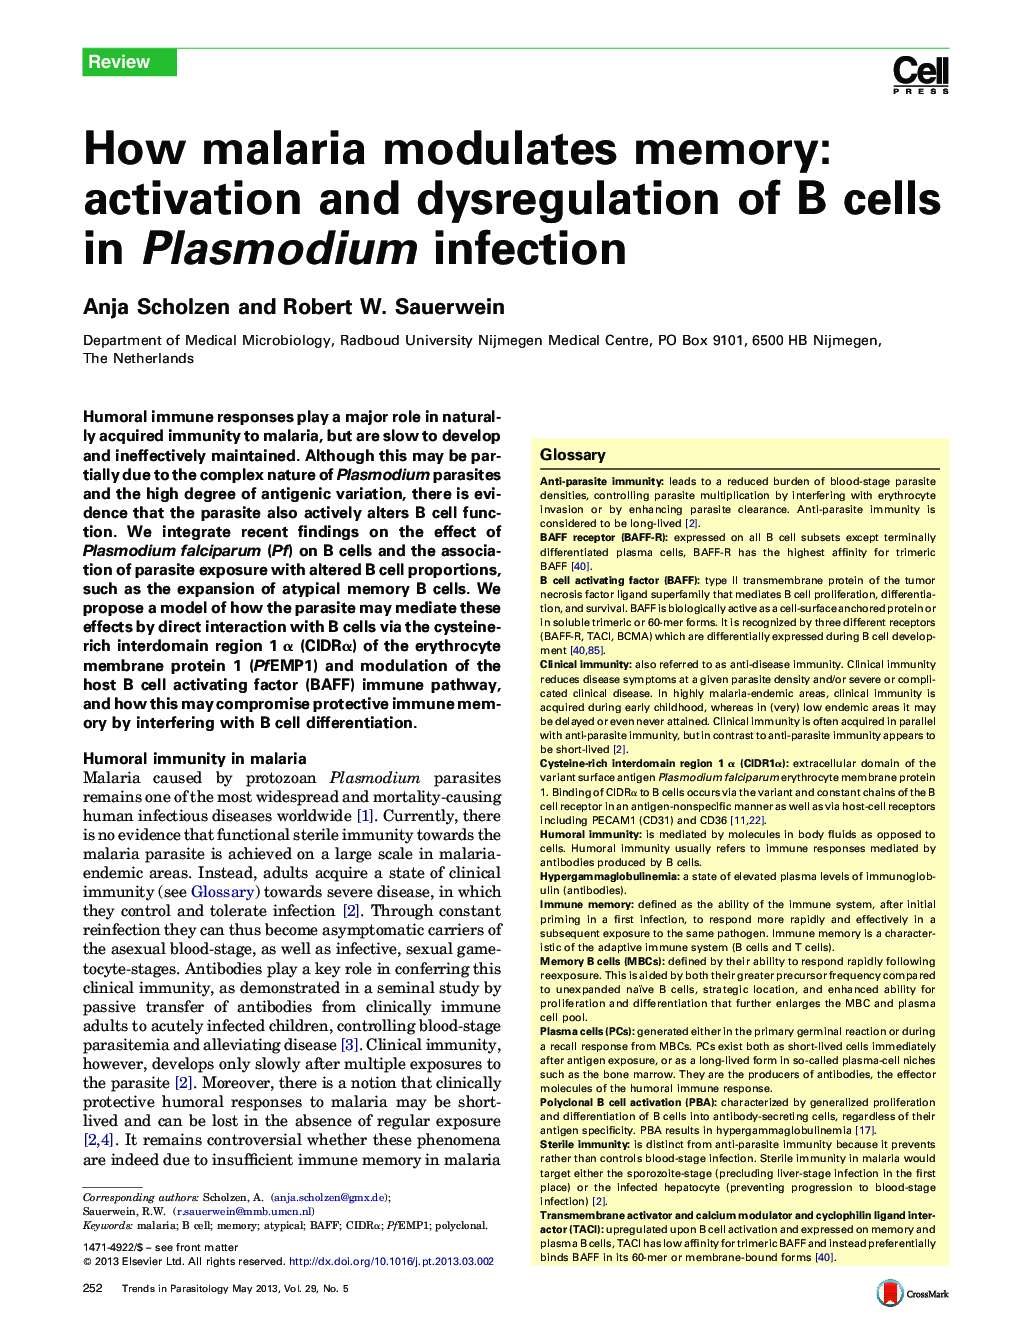 How malaria modulates memory: activation and dysregulation of B cells in Plasmodium infection